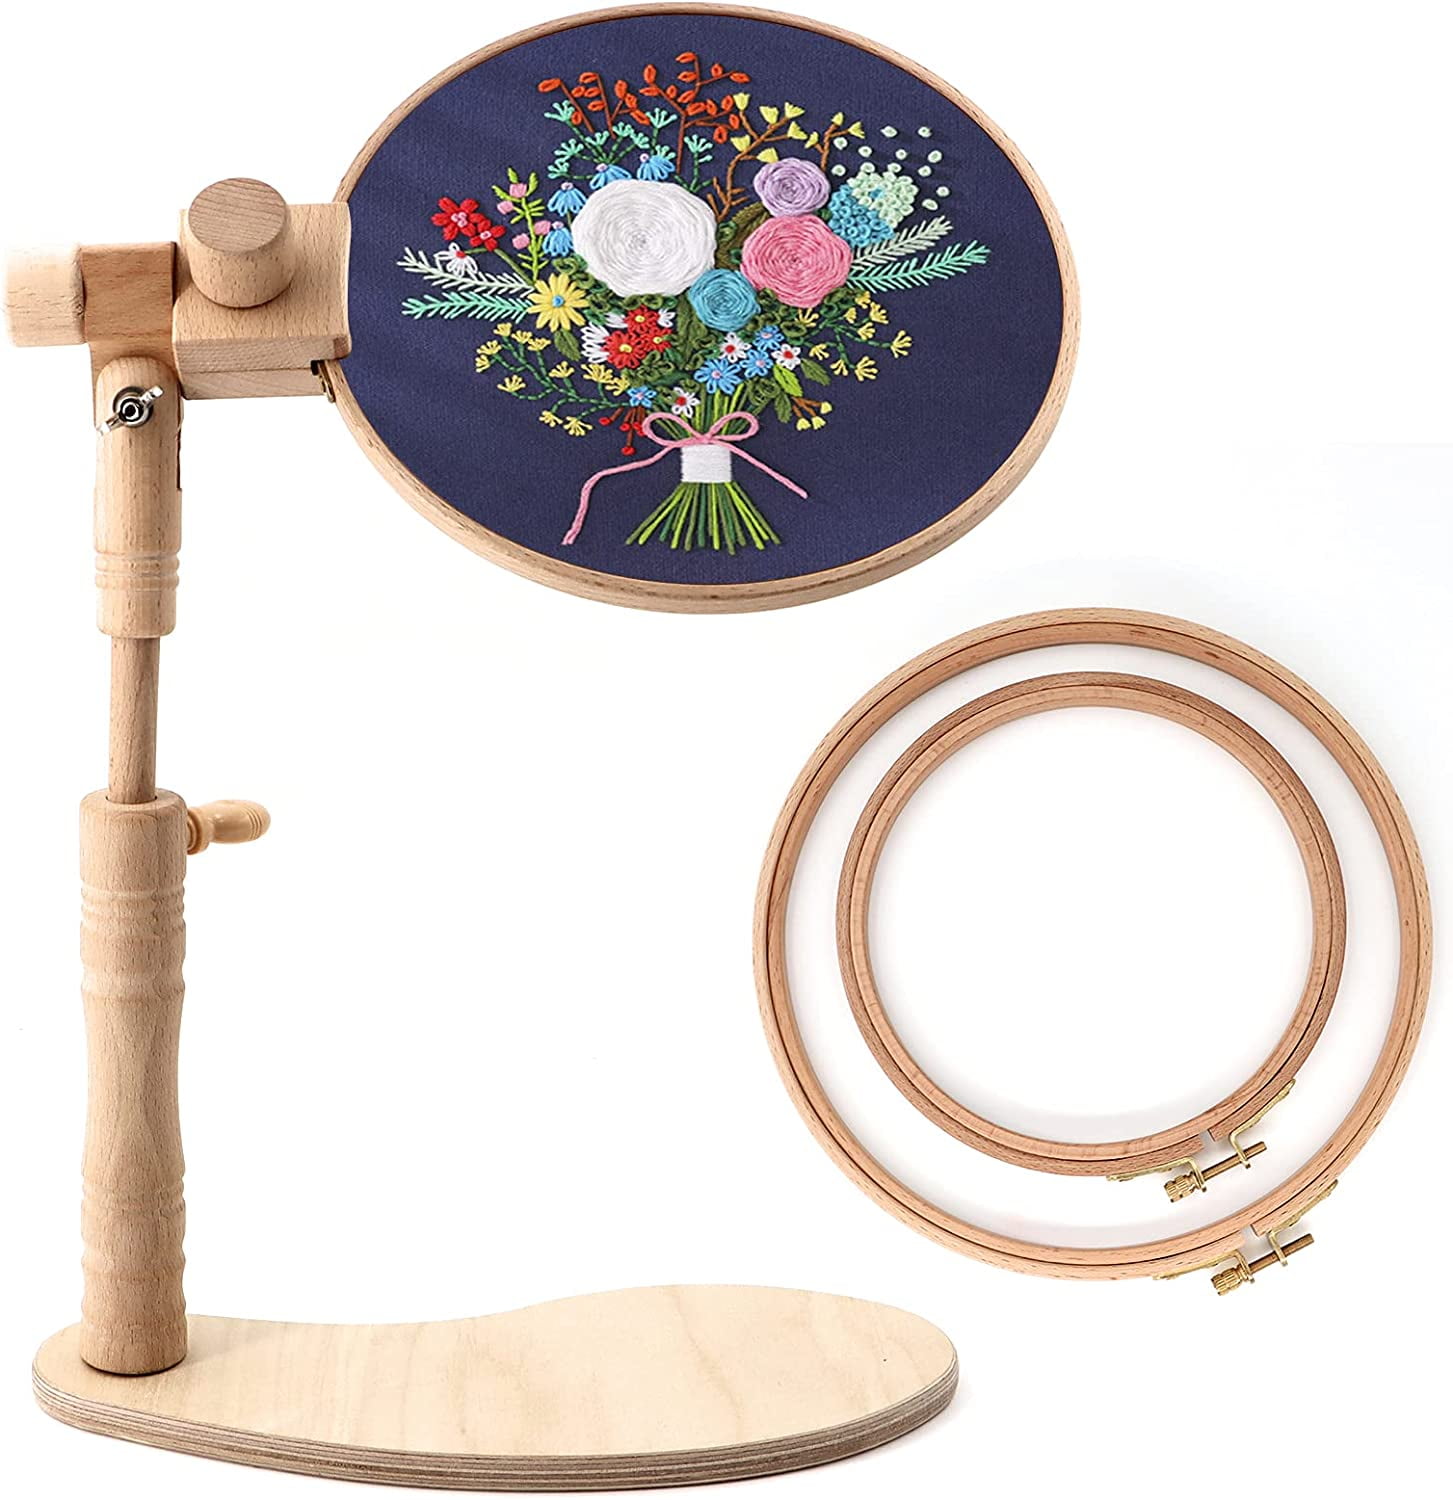 Embroidery Stand Holder - Hands Free Embroidery Hoop Stand, Beech